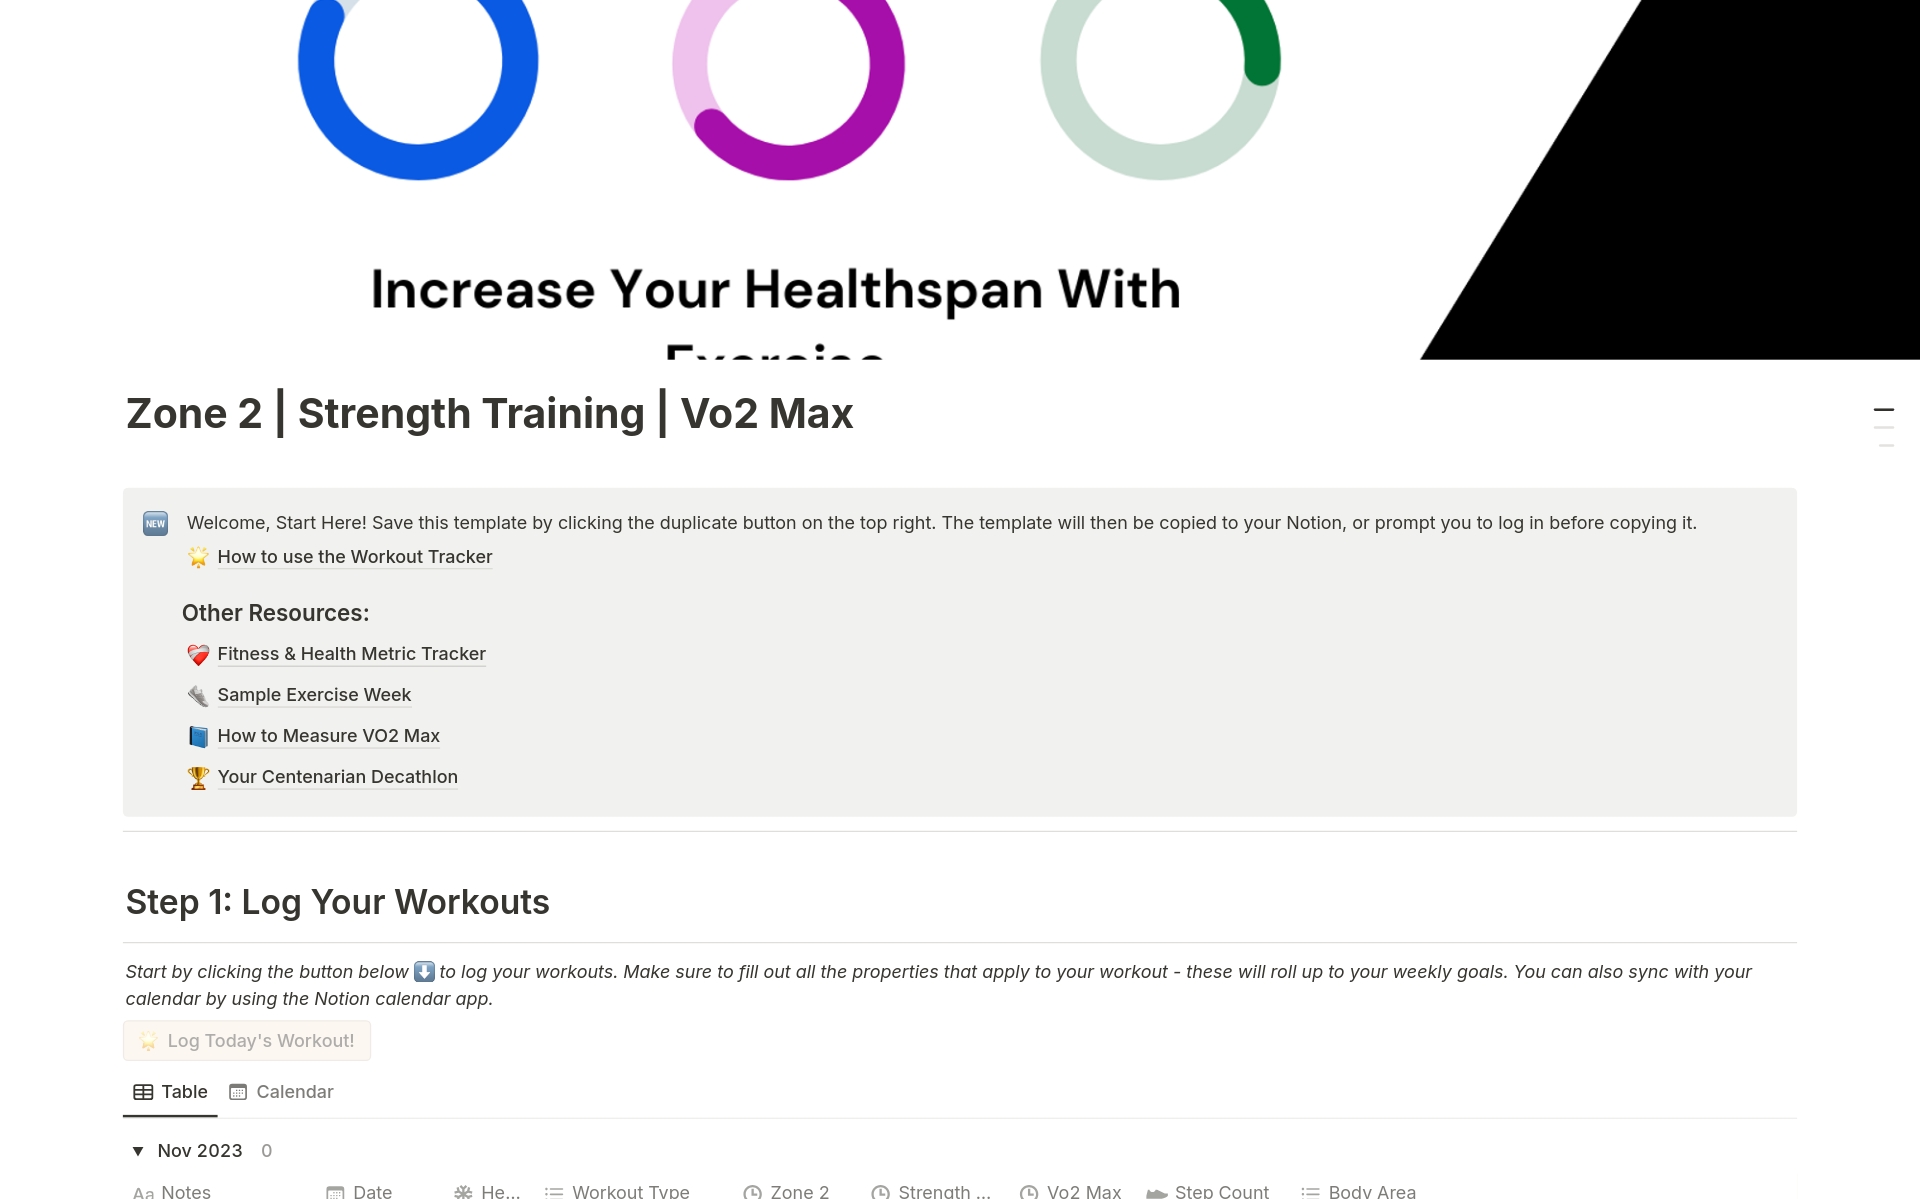 Track your Strength Training, Zone2 and Vo2 Max workouts to see if you are getting optimal amounts of each exercise to increase healthspan. Complete with a comprehensive weekly dashboard, it is easy to see your progress and track long-term health objectives.